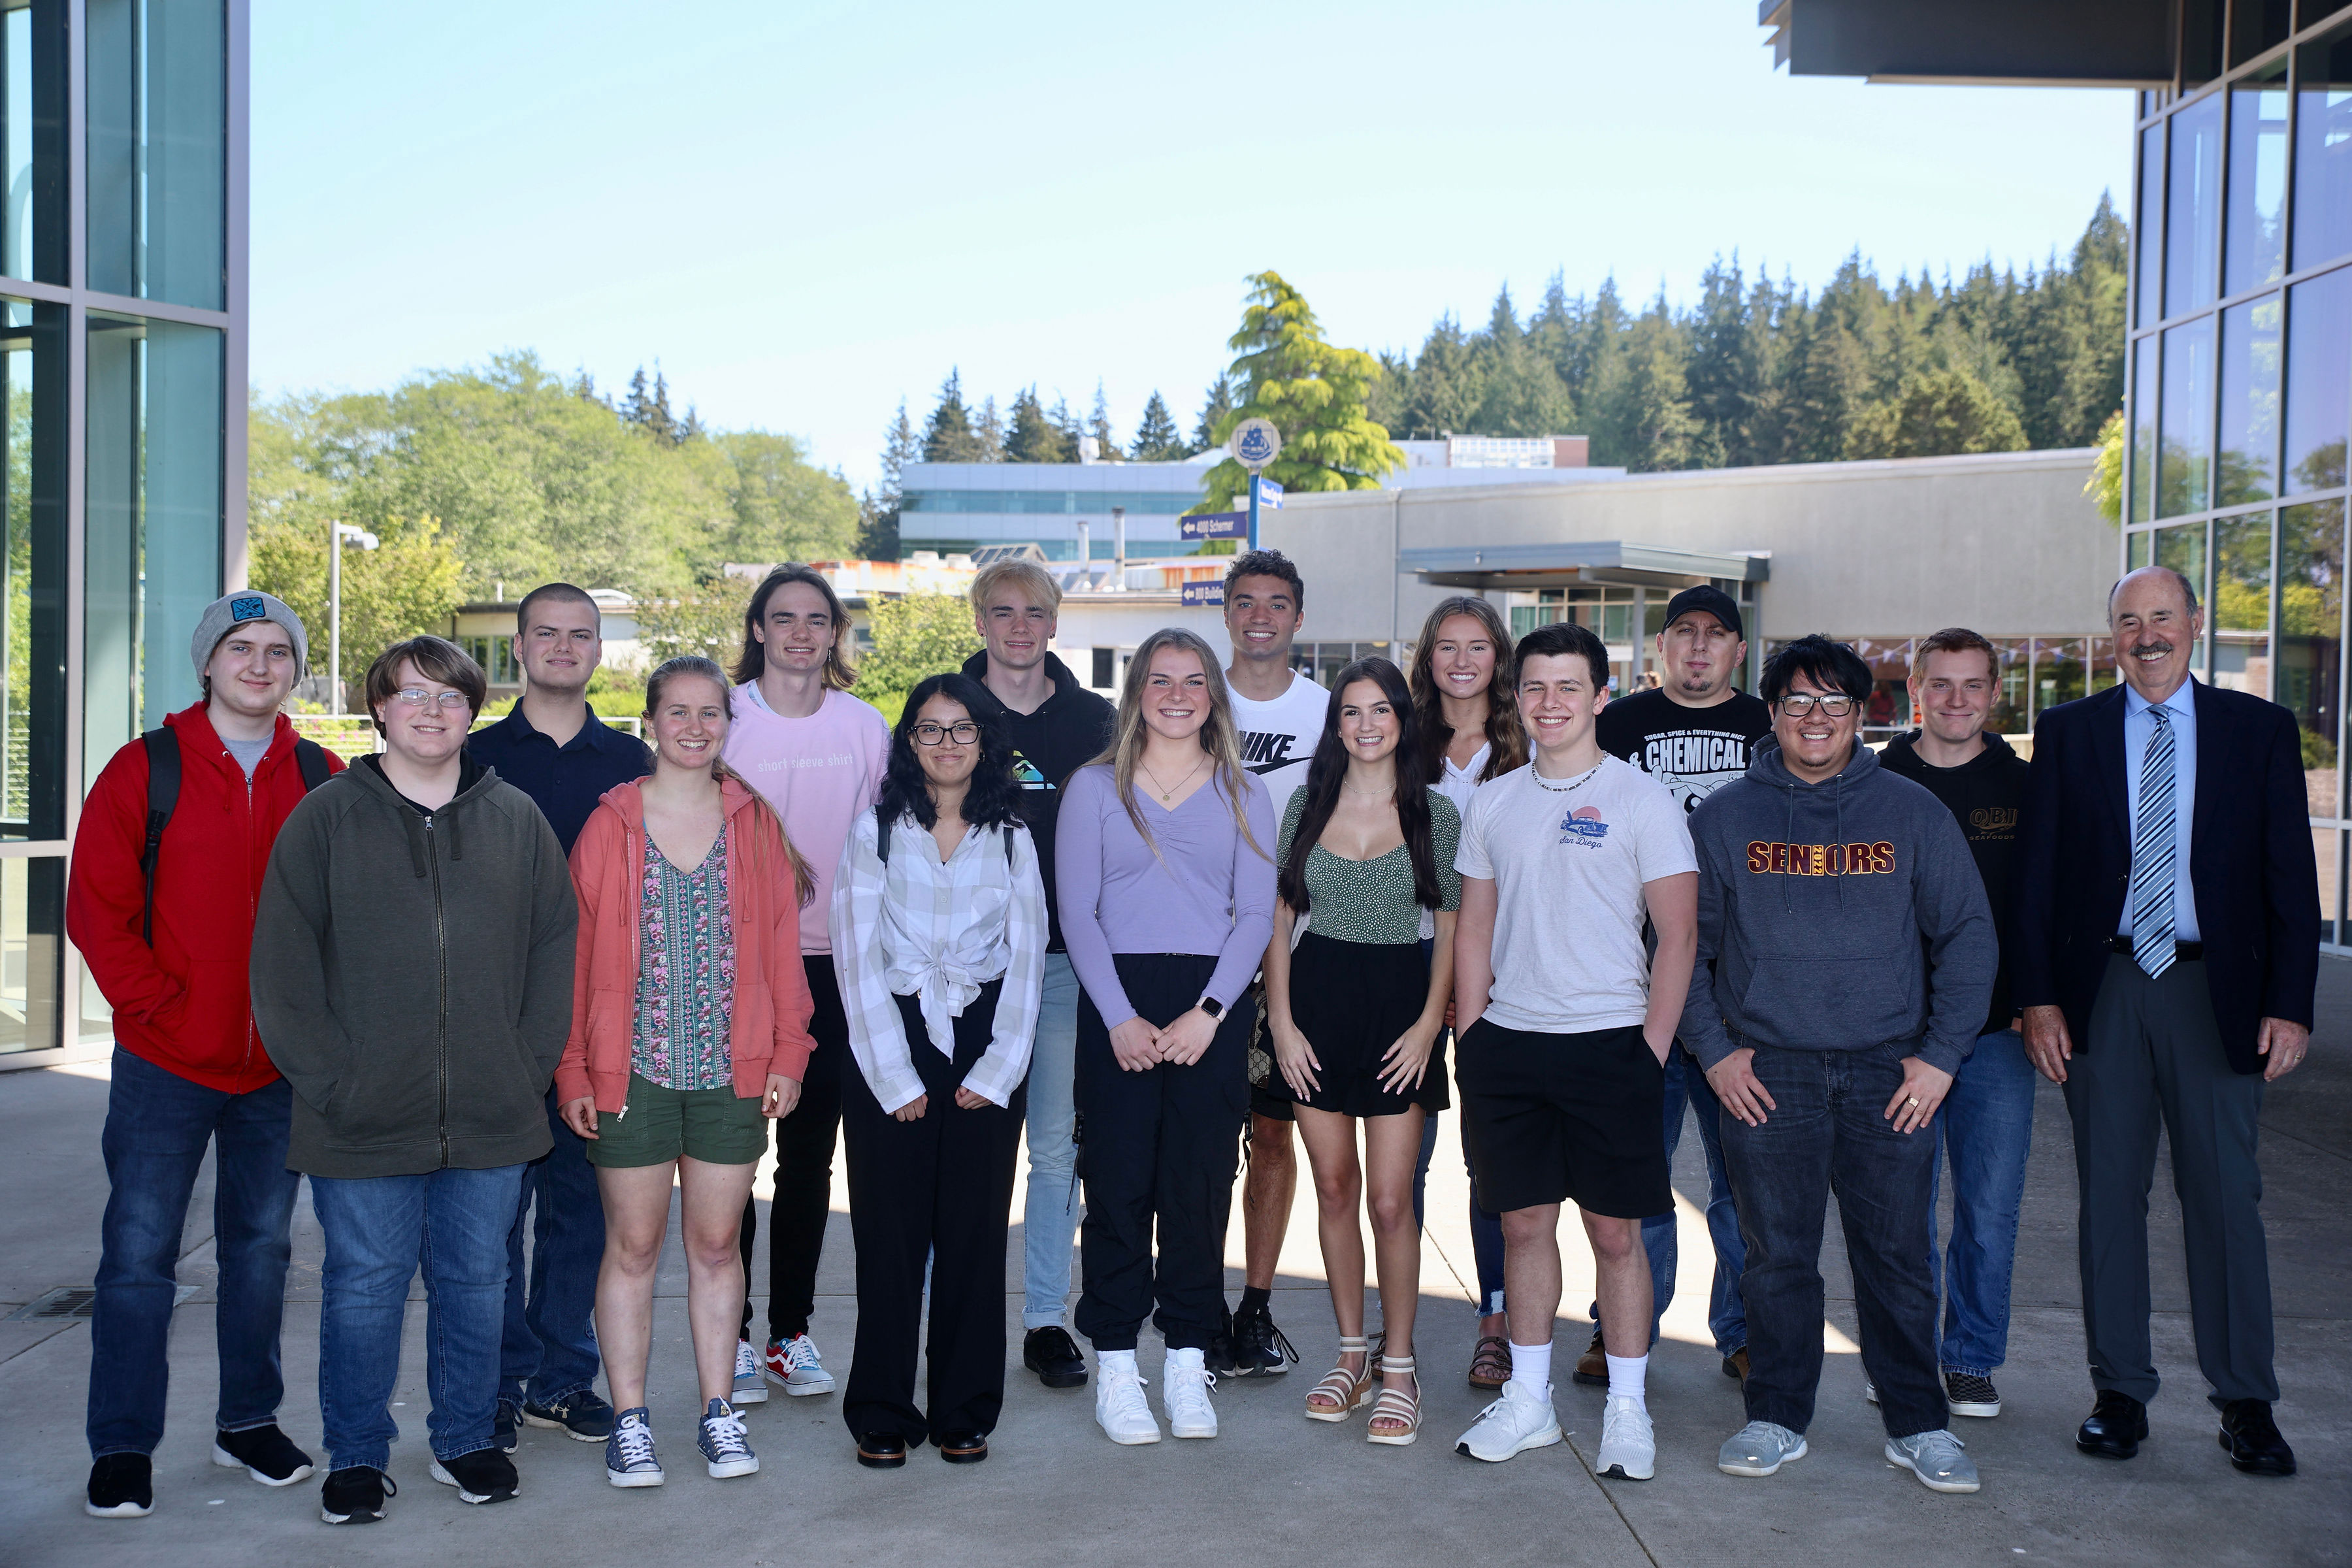 Front Row - Left to Right: Xander Miller, Ariana Jarnes, Mayra Arriaga, Hannah Hamilton, Shaelyn Martens, Jacob Salstrom, Ken Yi Jr. Back Row - Left to Right: Jacob Church, Brylie Jarnes, Matthew Idso, William Idso, Tré (Daniel) Seydel, Kennedy Hatton, Rick Richardson, Dylan Hollingsworth, Dr. Brewster; Not pictured: Clayton Scace